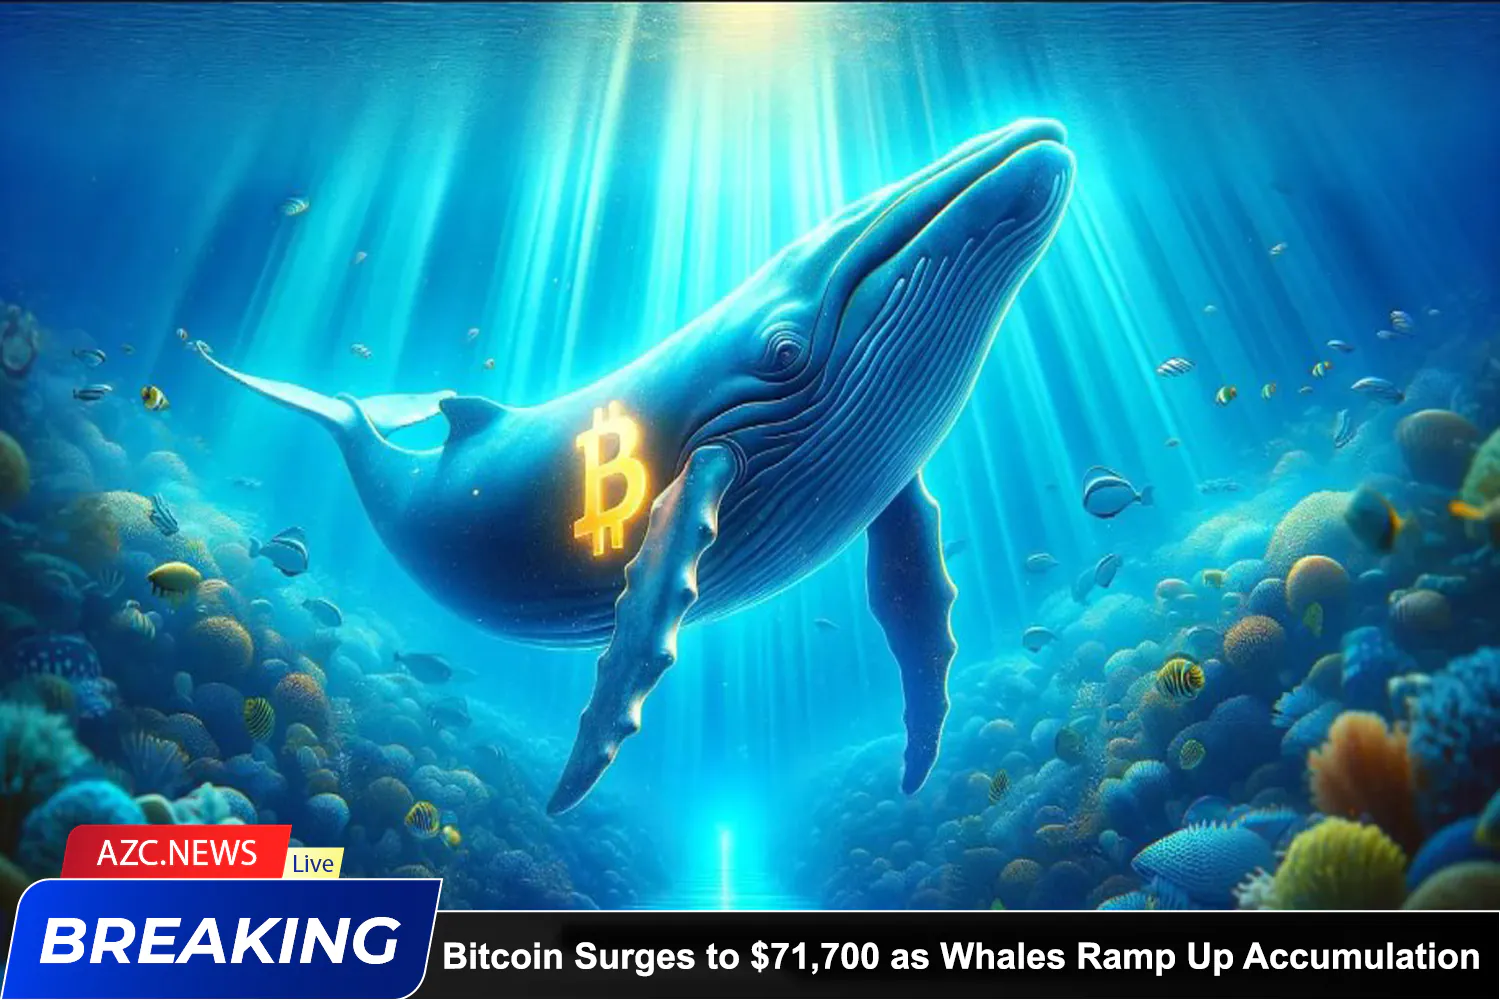 Azcnews Bitcoin Surges To $71,700 As Whales Ramp Up Accumulation